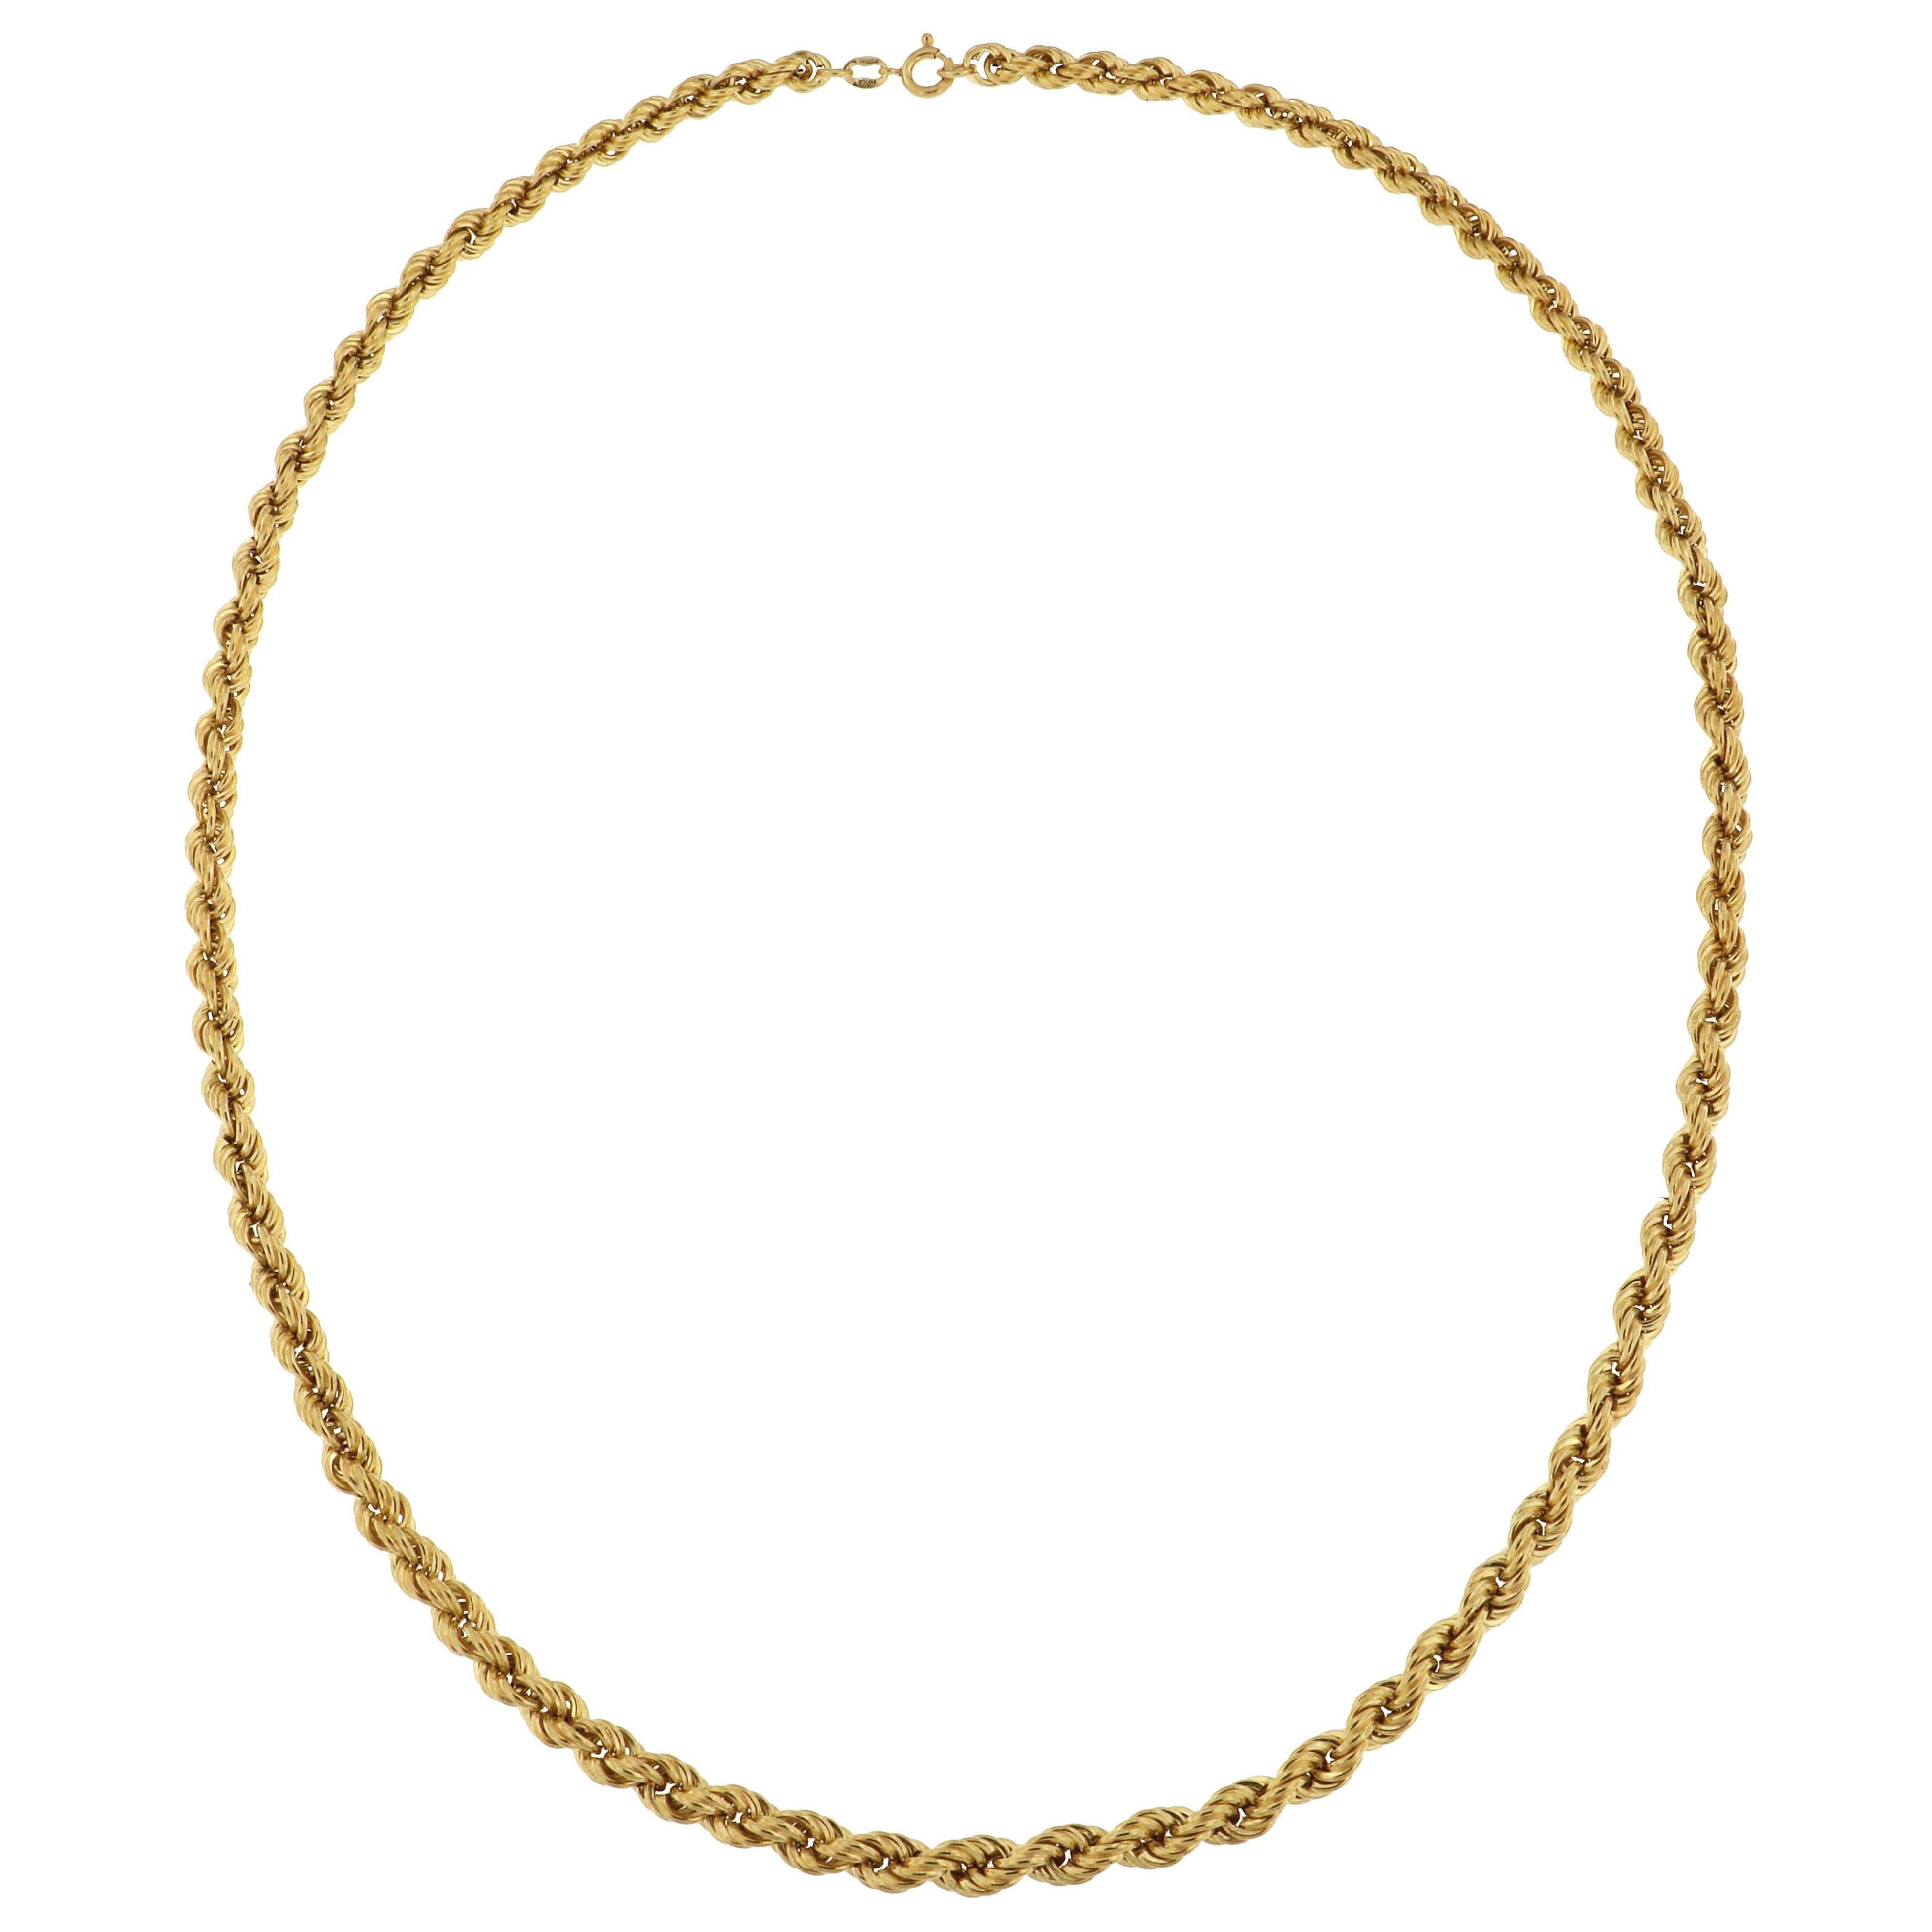  1960s 18 Kt Gold Twisted Wire Necklace Handcrafted in Italy 